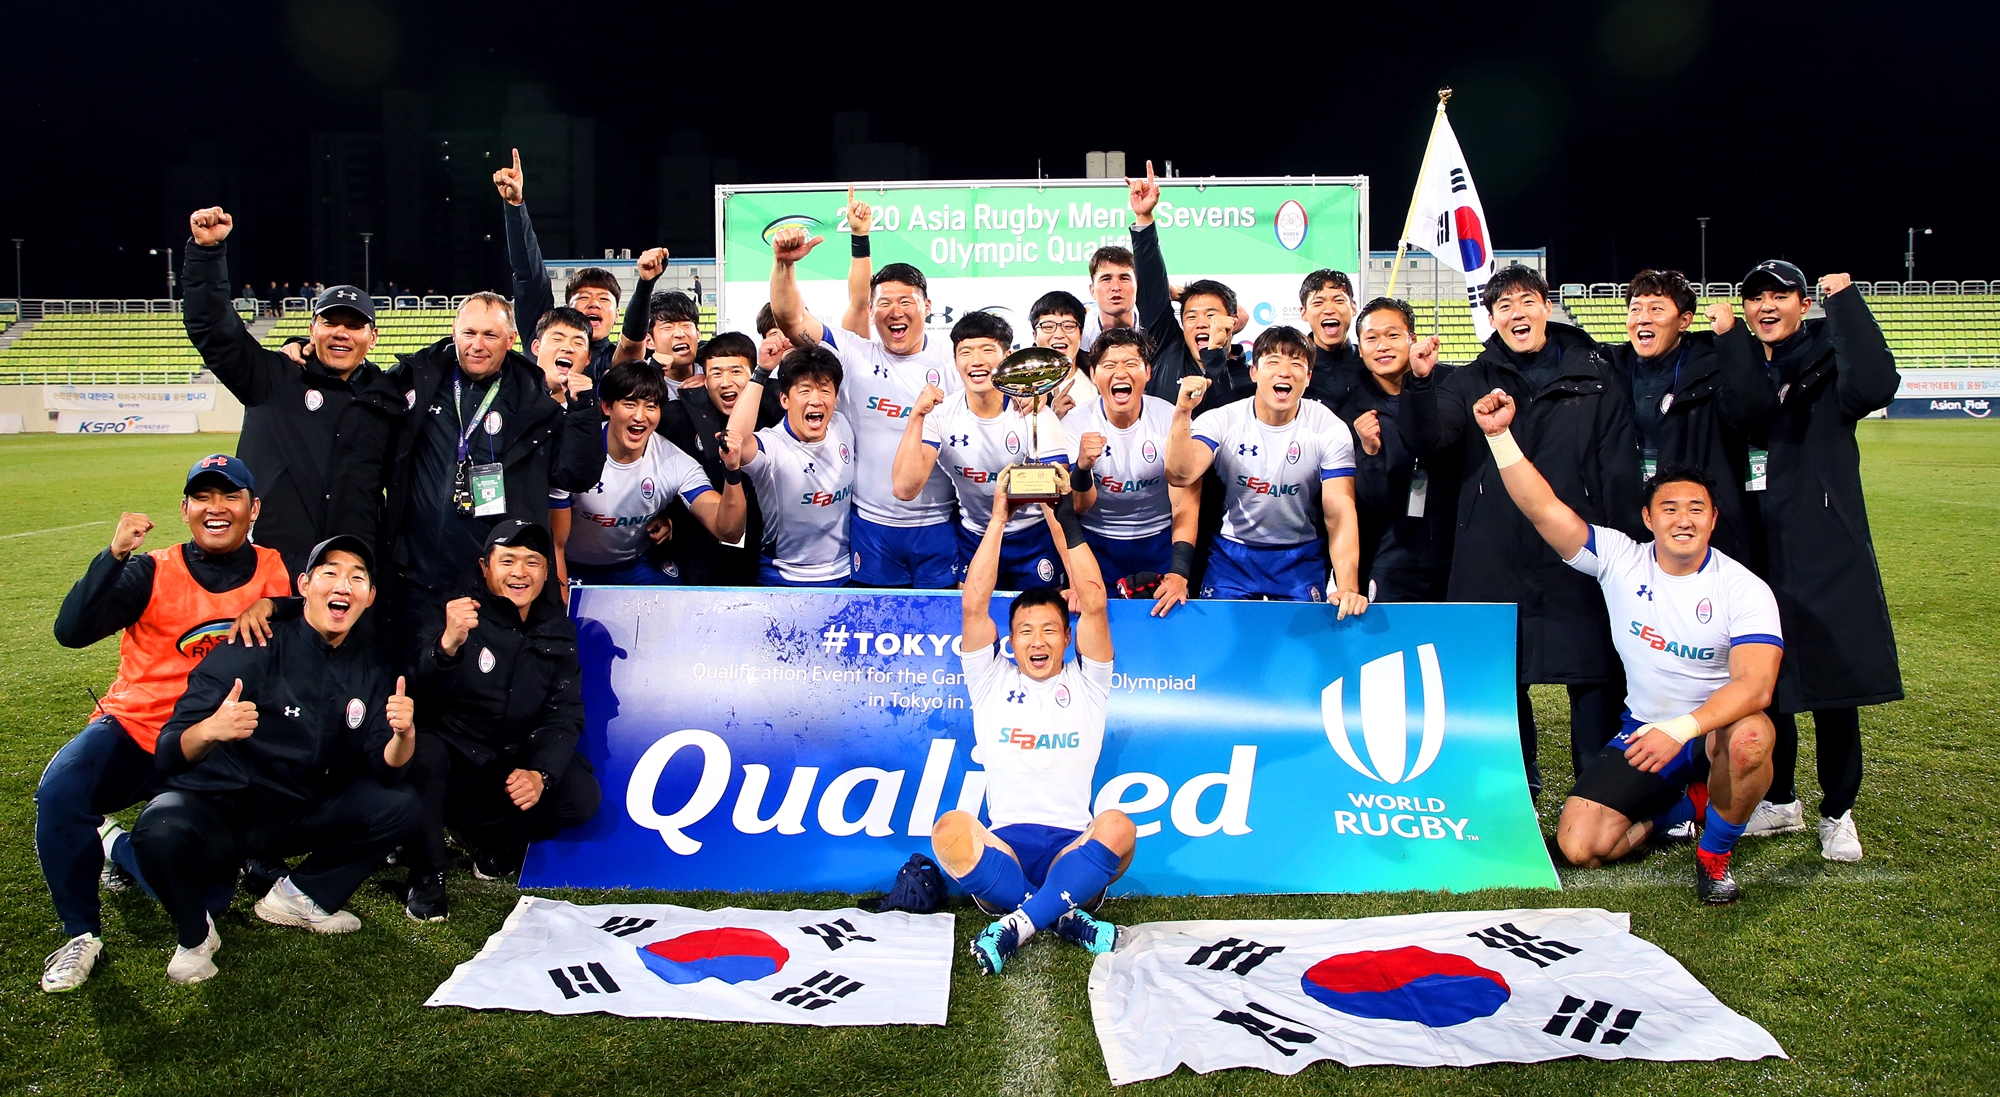 The Korea team on Nov. 24 rejoices over a victory at the Namdong Asiad Rugby Field in Incheon, after securing the spot in the men's rugby sevens at Tokyo 2020 by beating Hong Kong.